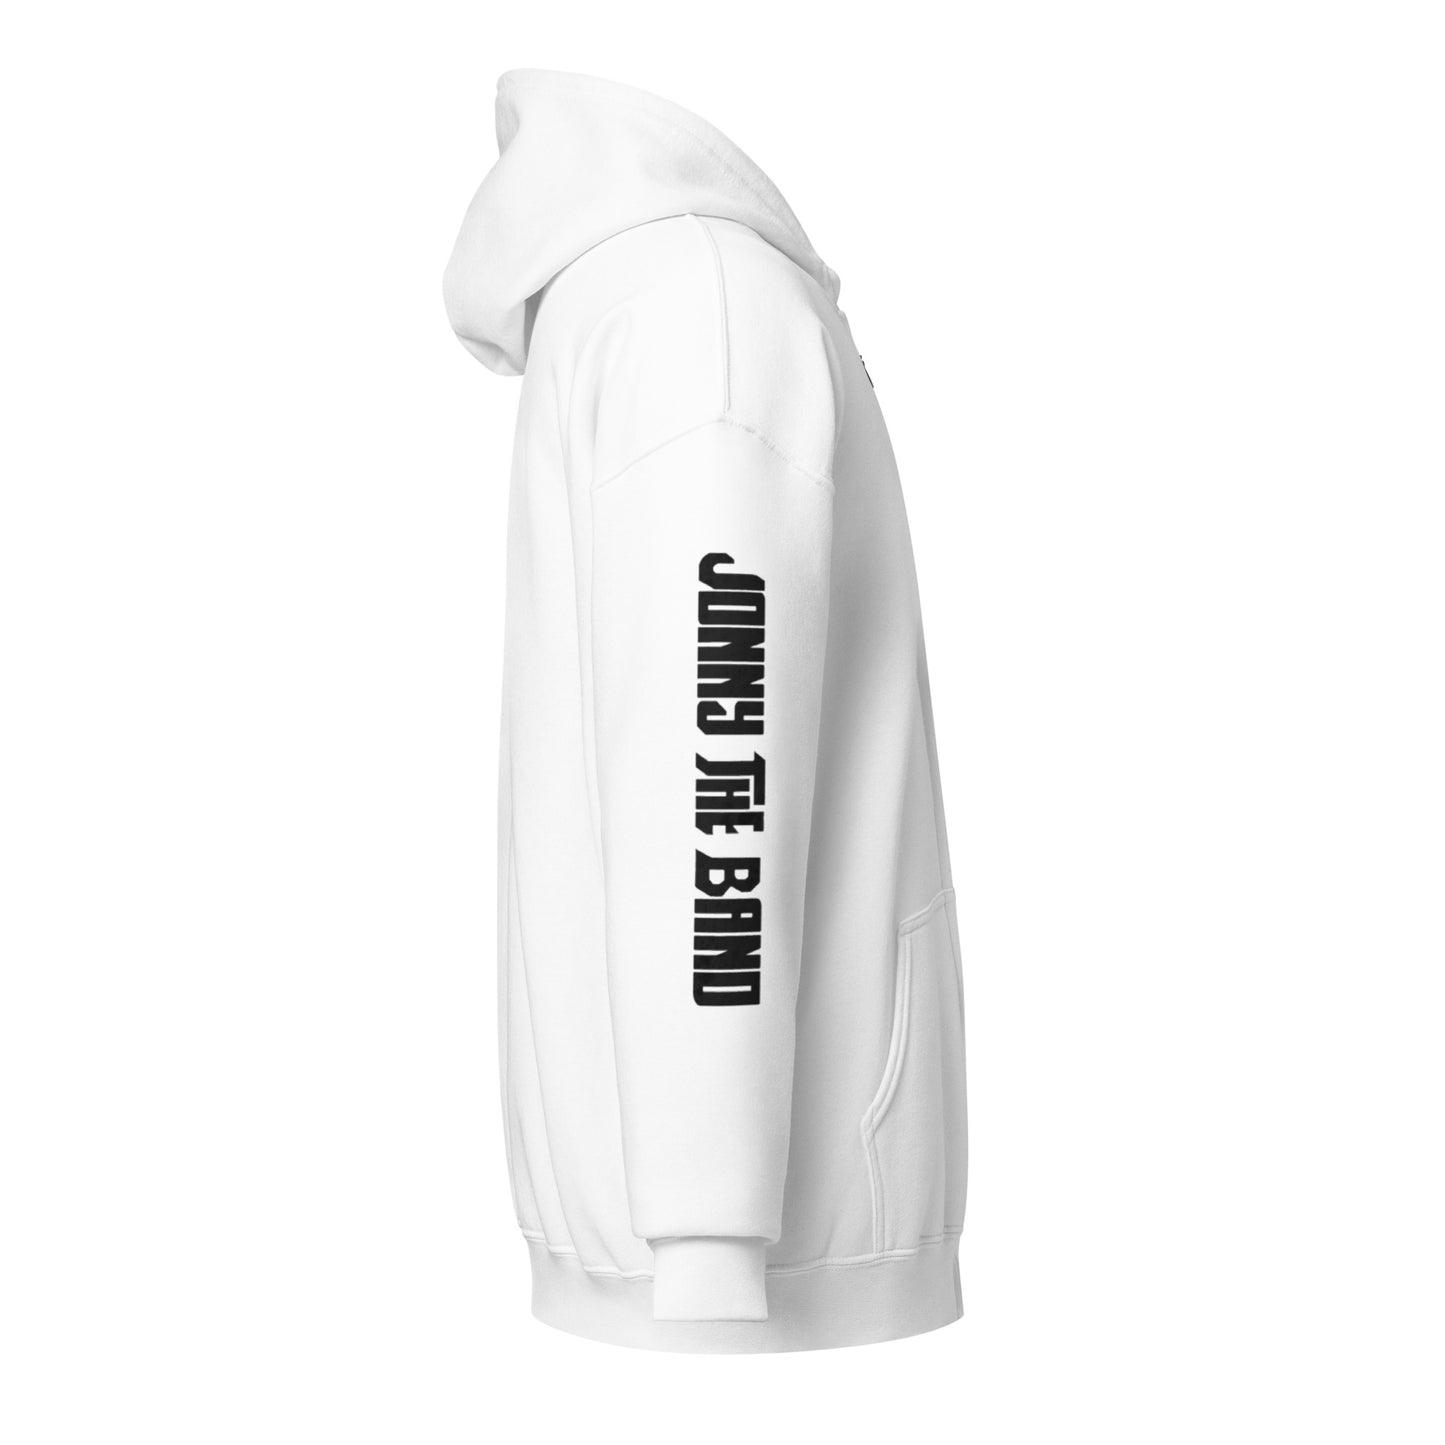 Jonny The Band - Zip Hoodie with Front Logo and Sleeve